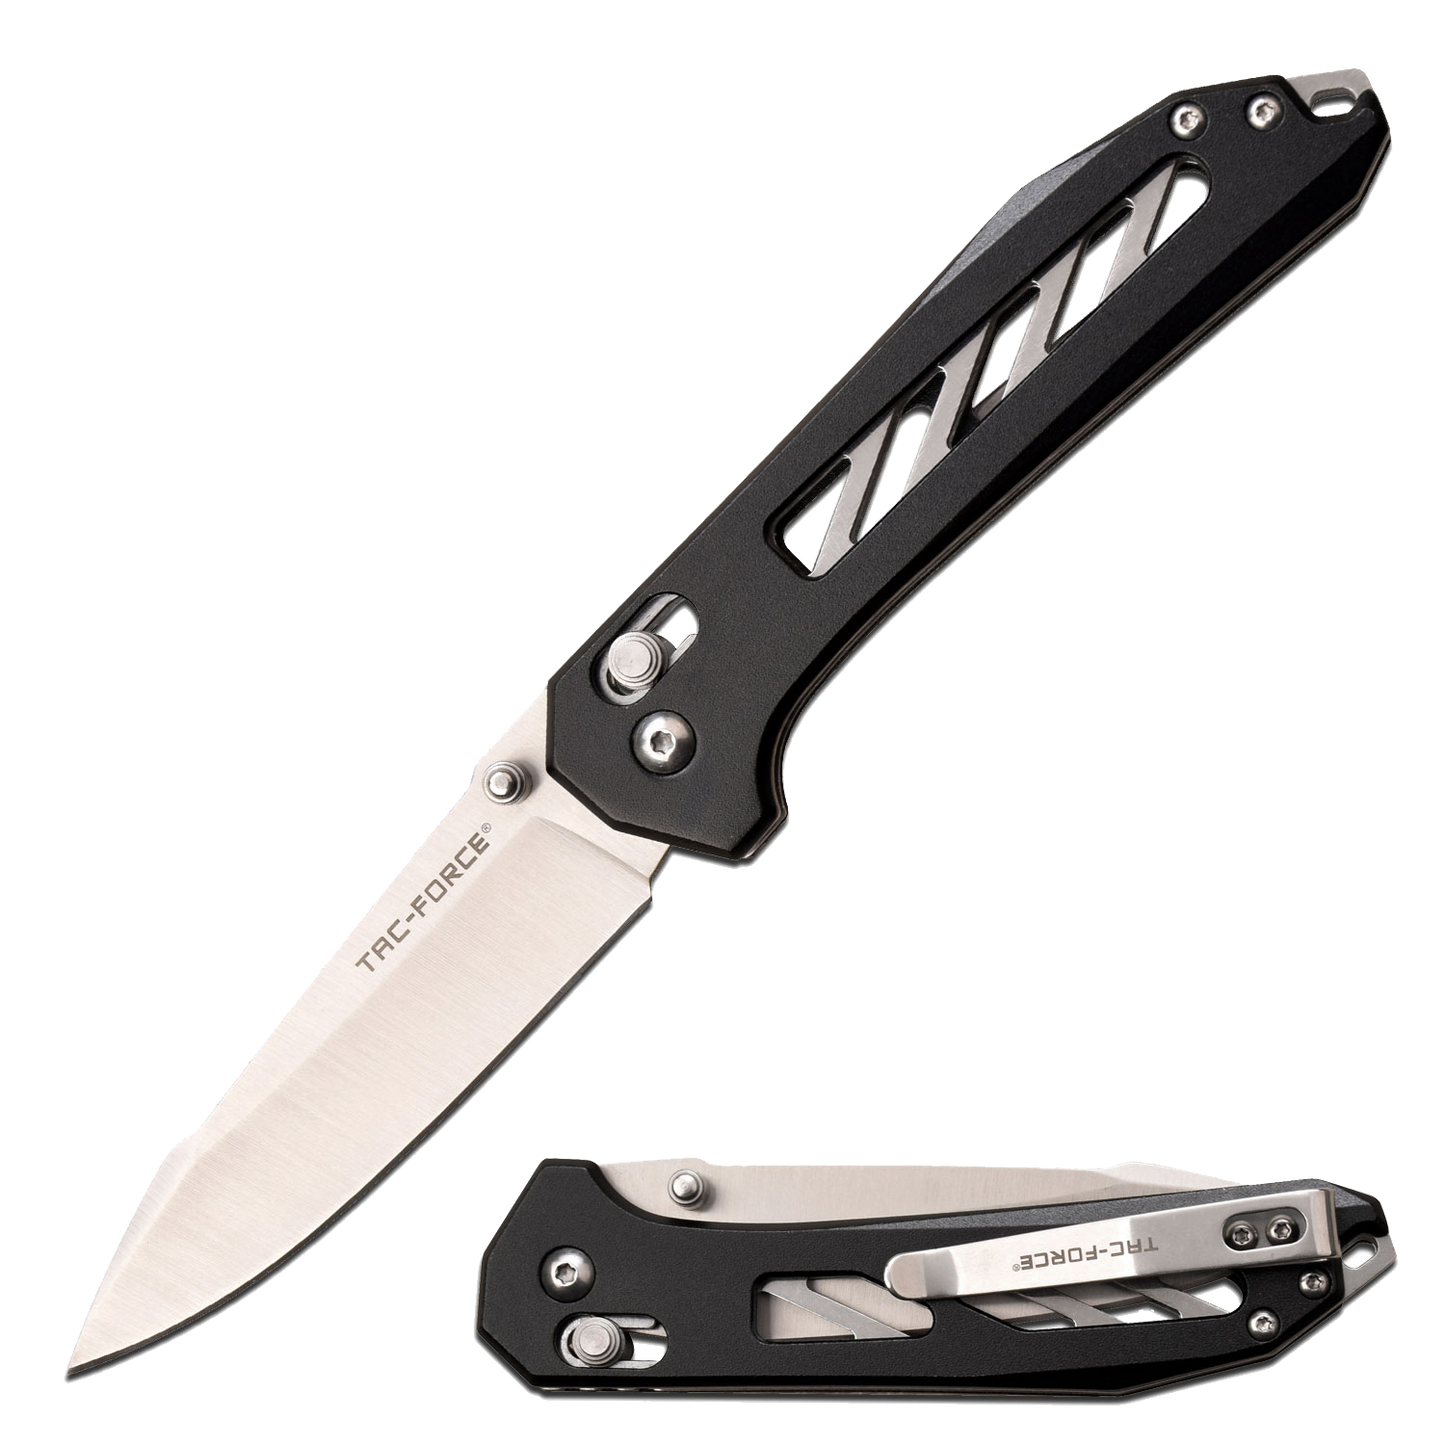 Tac-Force Tac Force Drop Point Pocket Folding Knife W Rapid Lock - Satin Blade 8 Inch Overall #tf-1035S Antique White